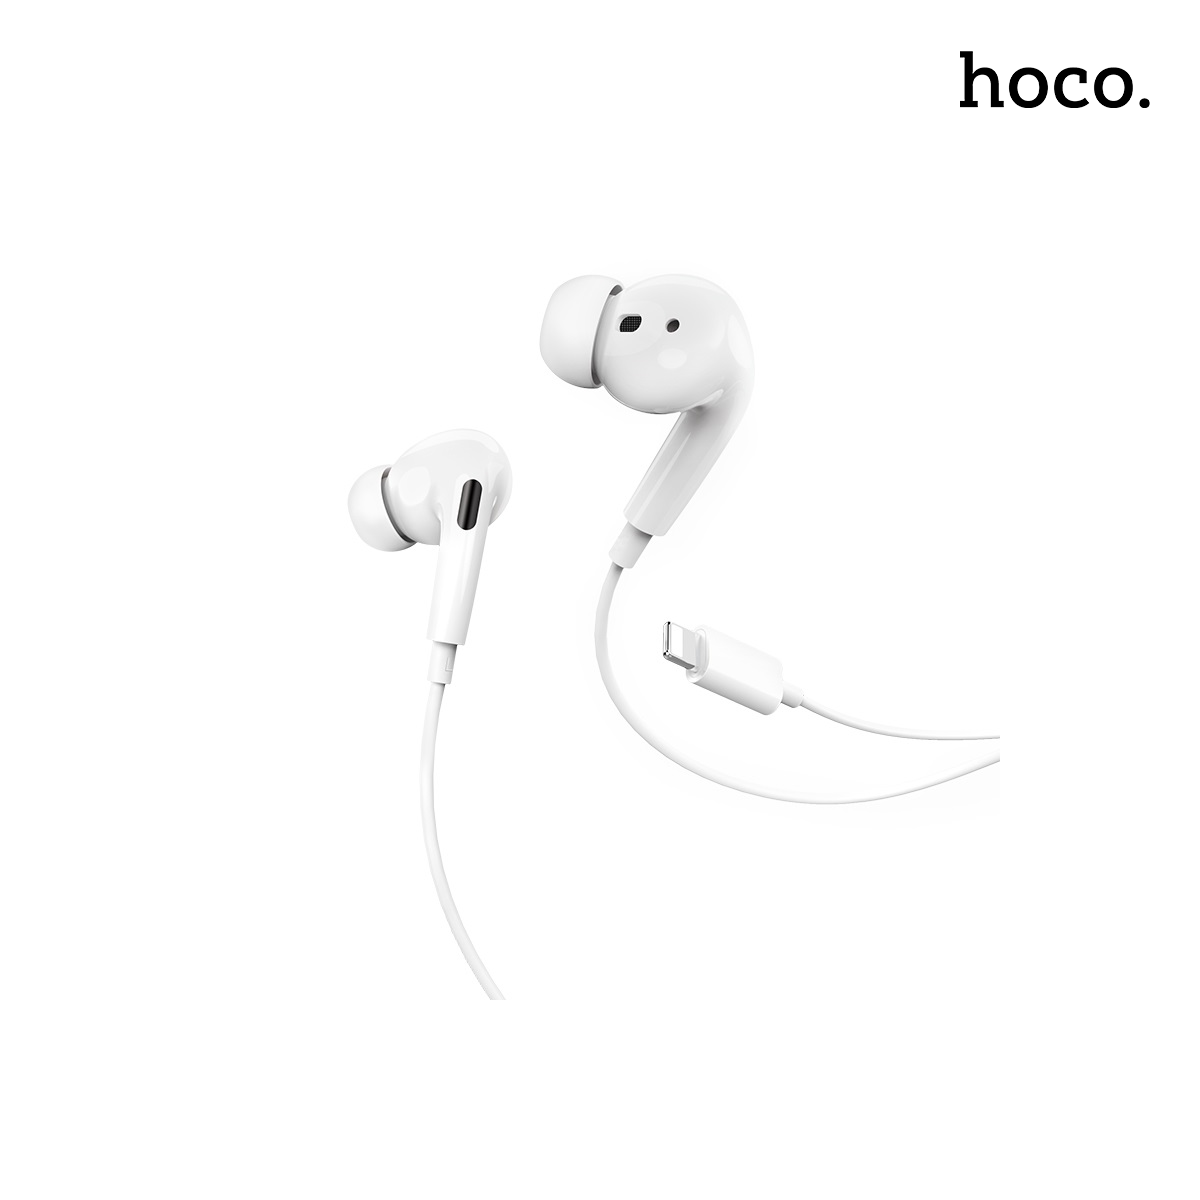 HOCO Max crystal earphones for Lightning with Microhone – M1